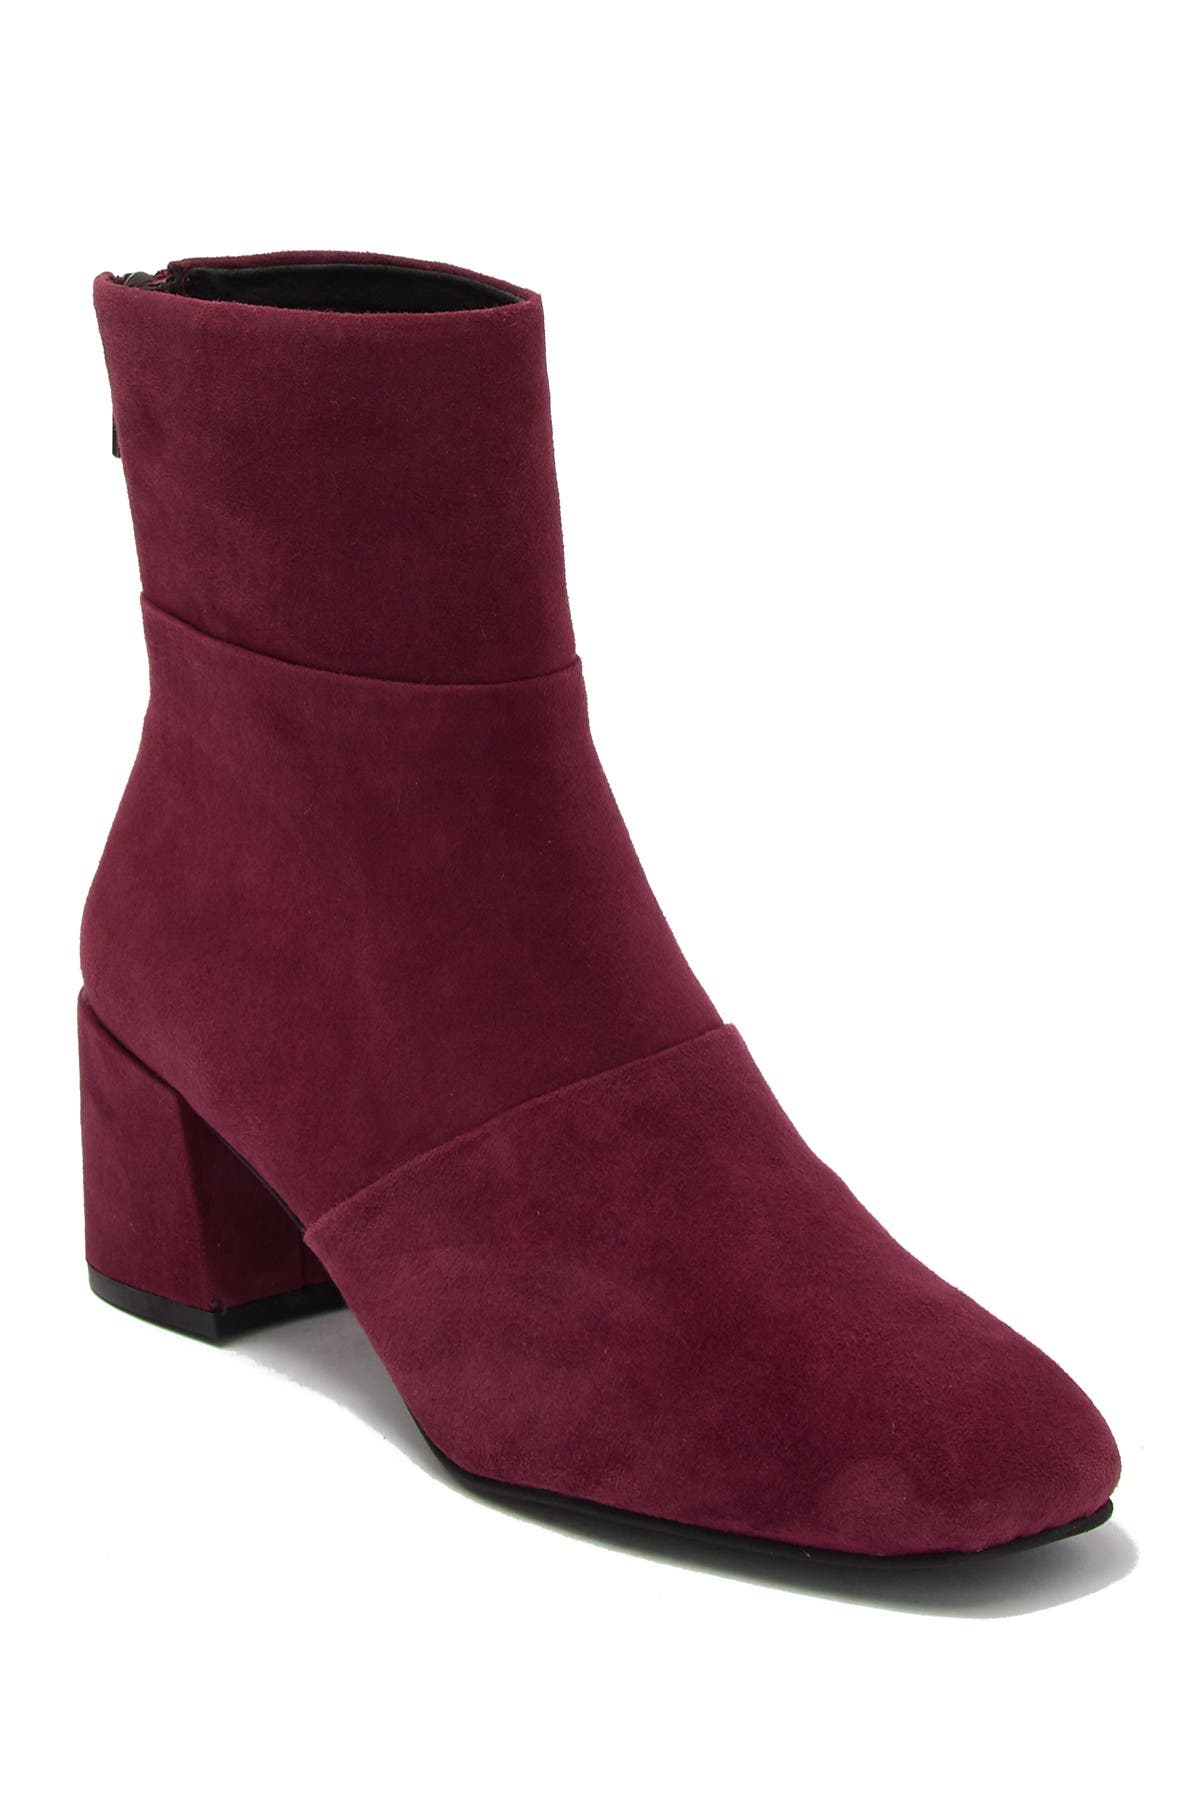 kenneth cole eryc bootie